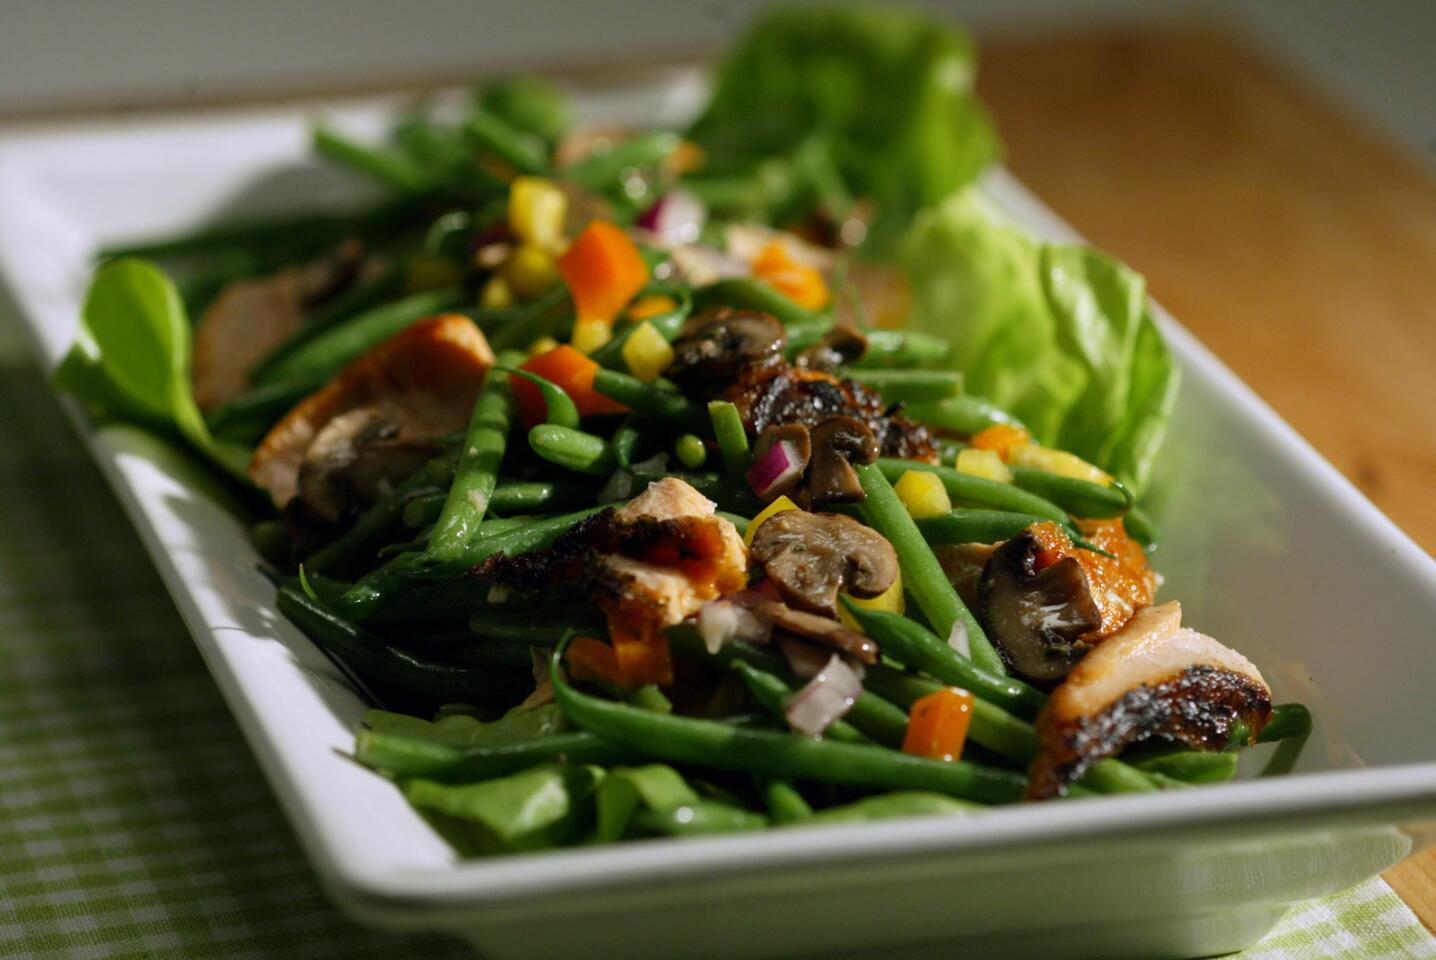 Salmon and haricots verts salad with lemon herb dressing